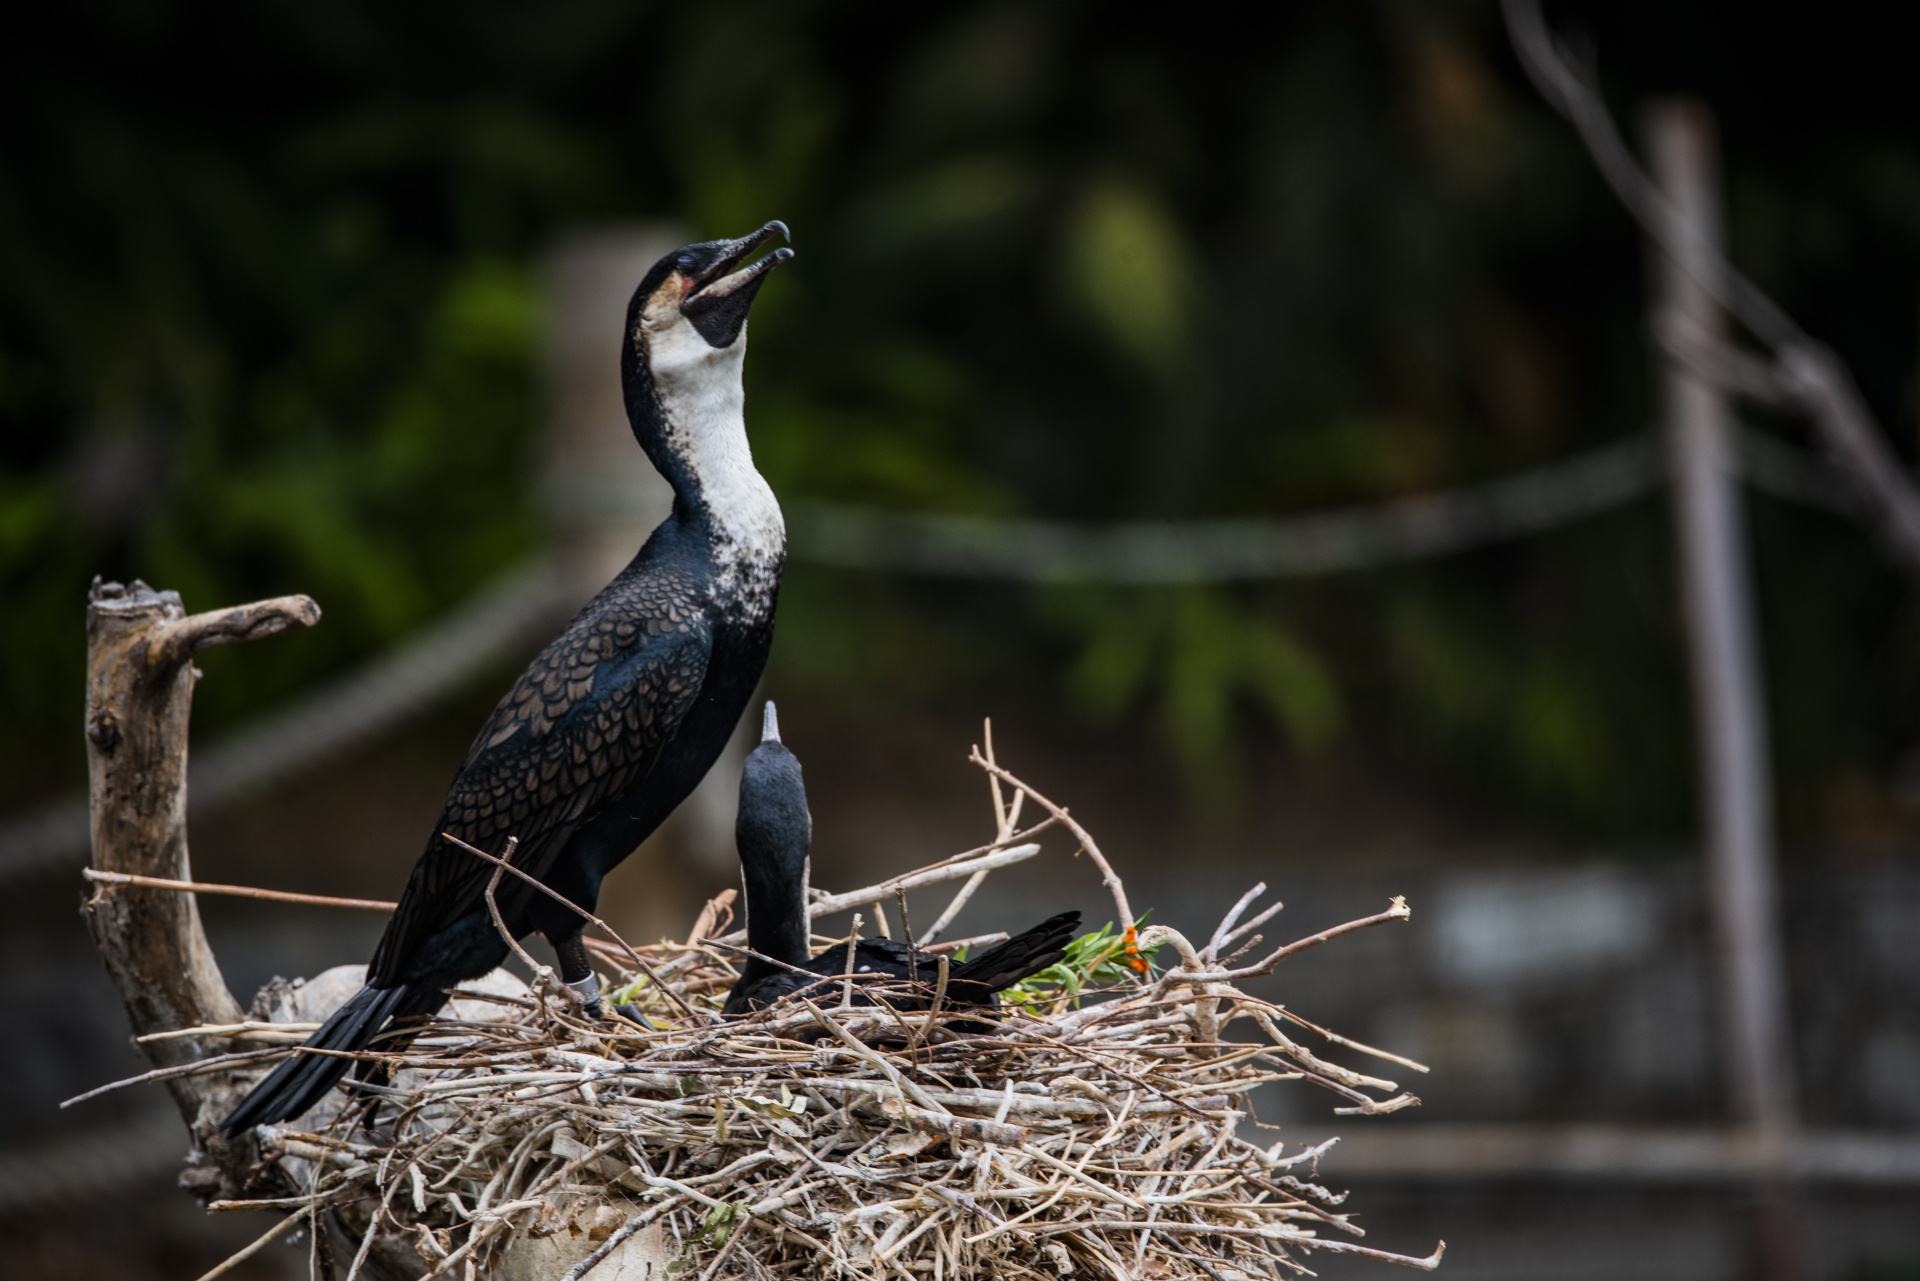 Cormorants nesting with one standing and the other sitting